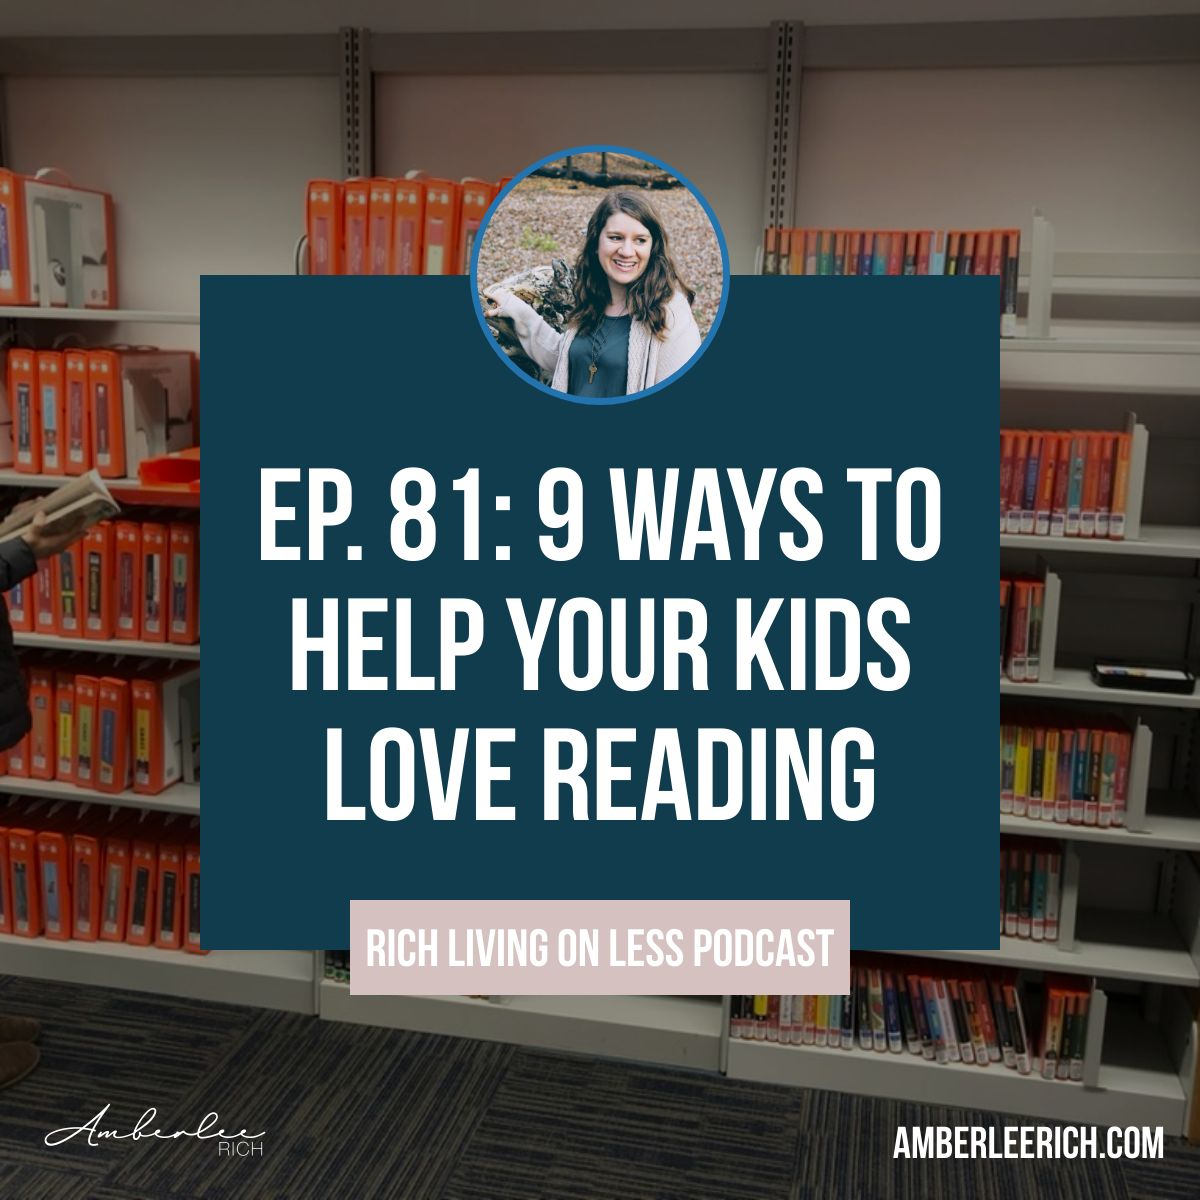 Ep. 81: 9 Ways to Help Your Kids Love Reading 1